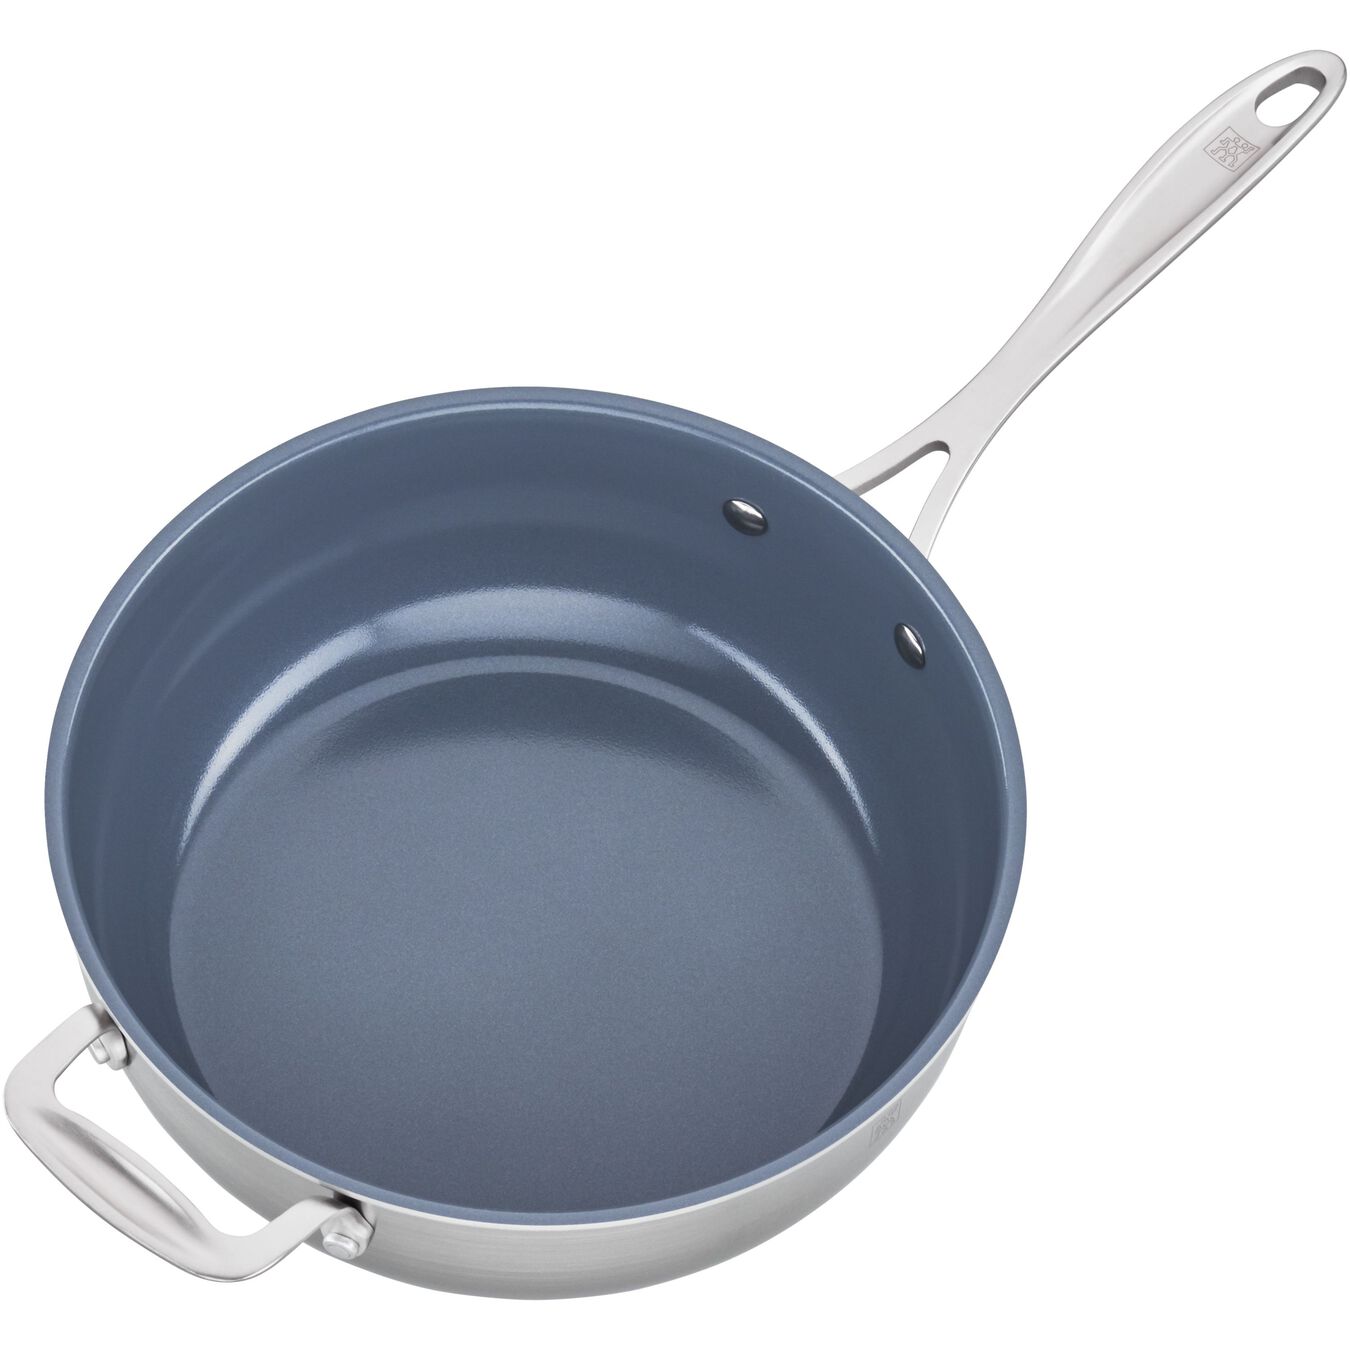 25 cm 18/10 Stainless Steel Saute pan,,large 4